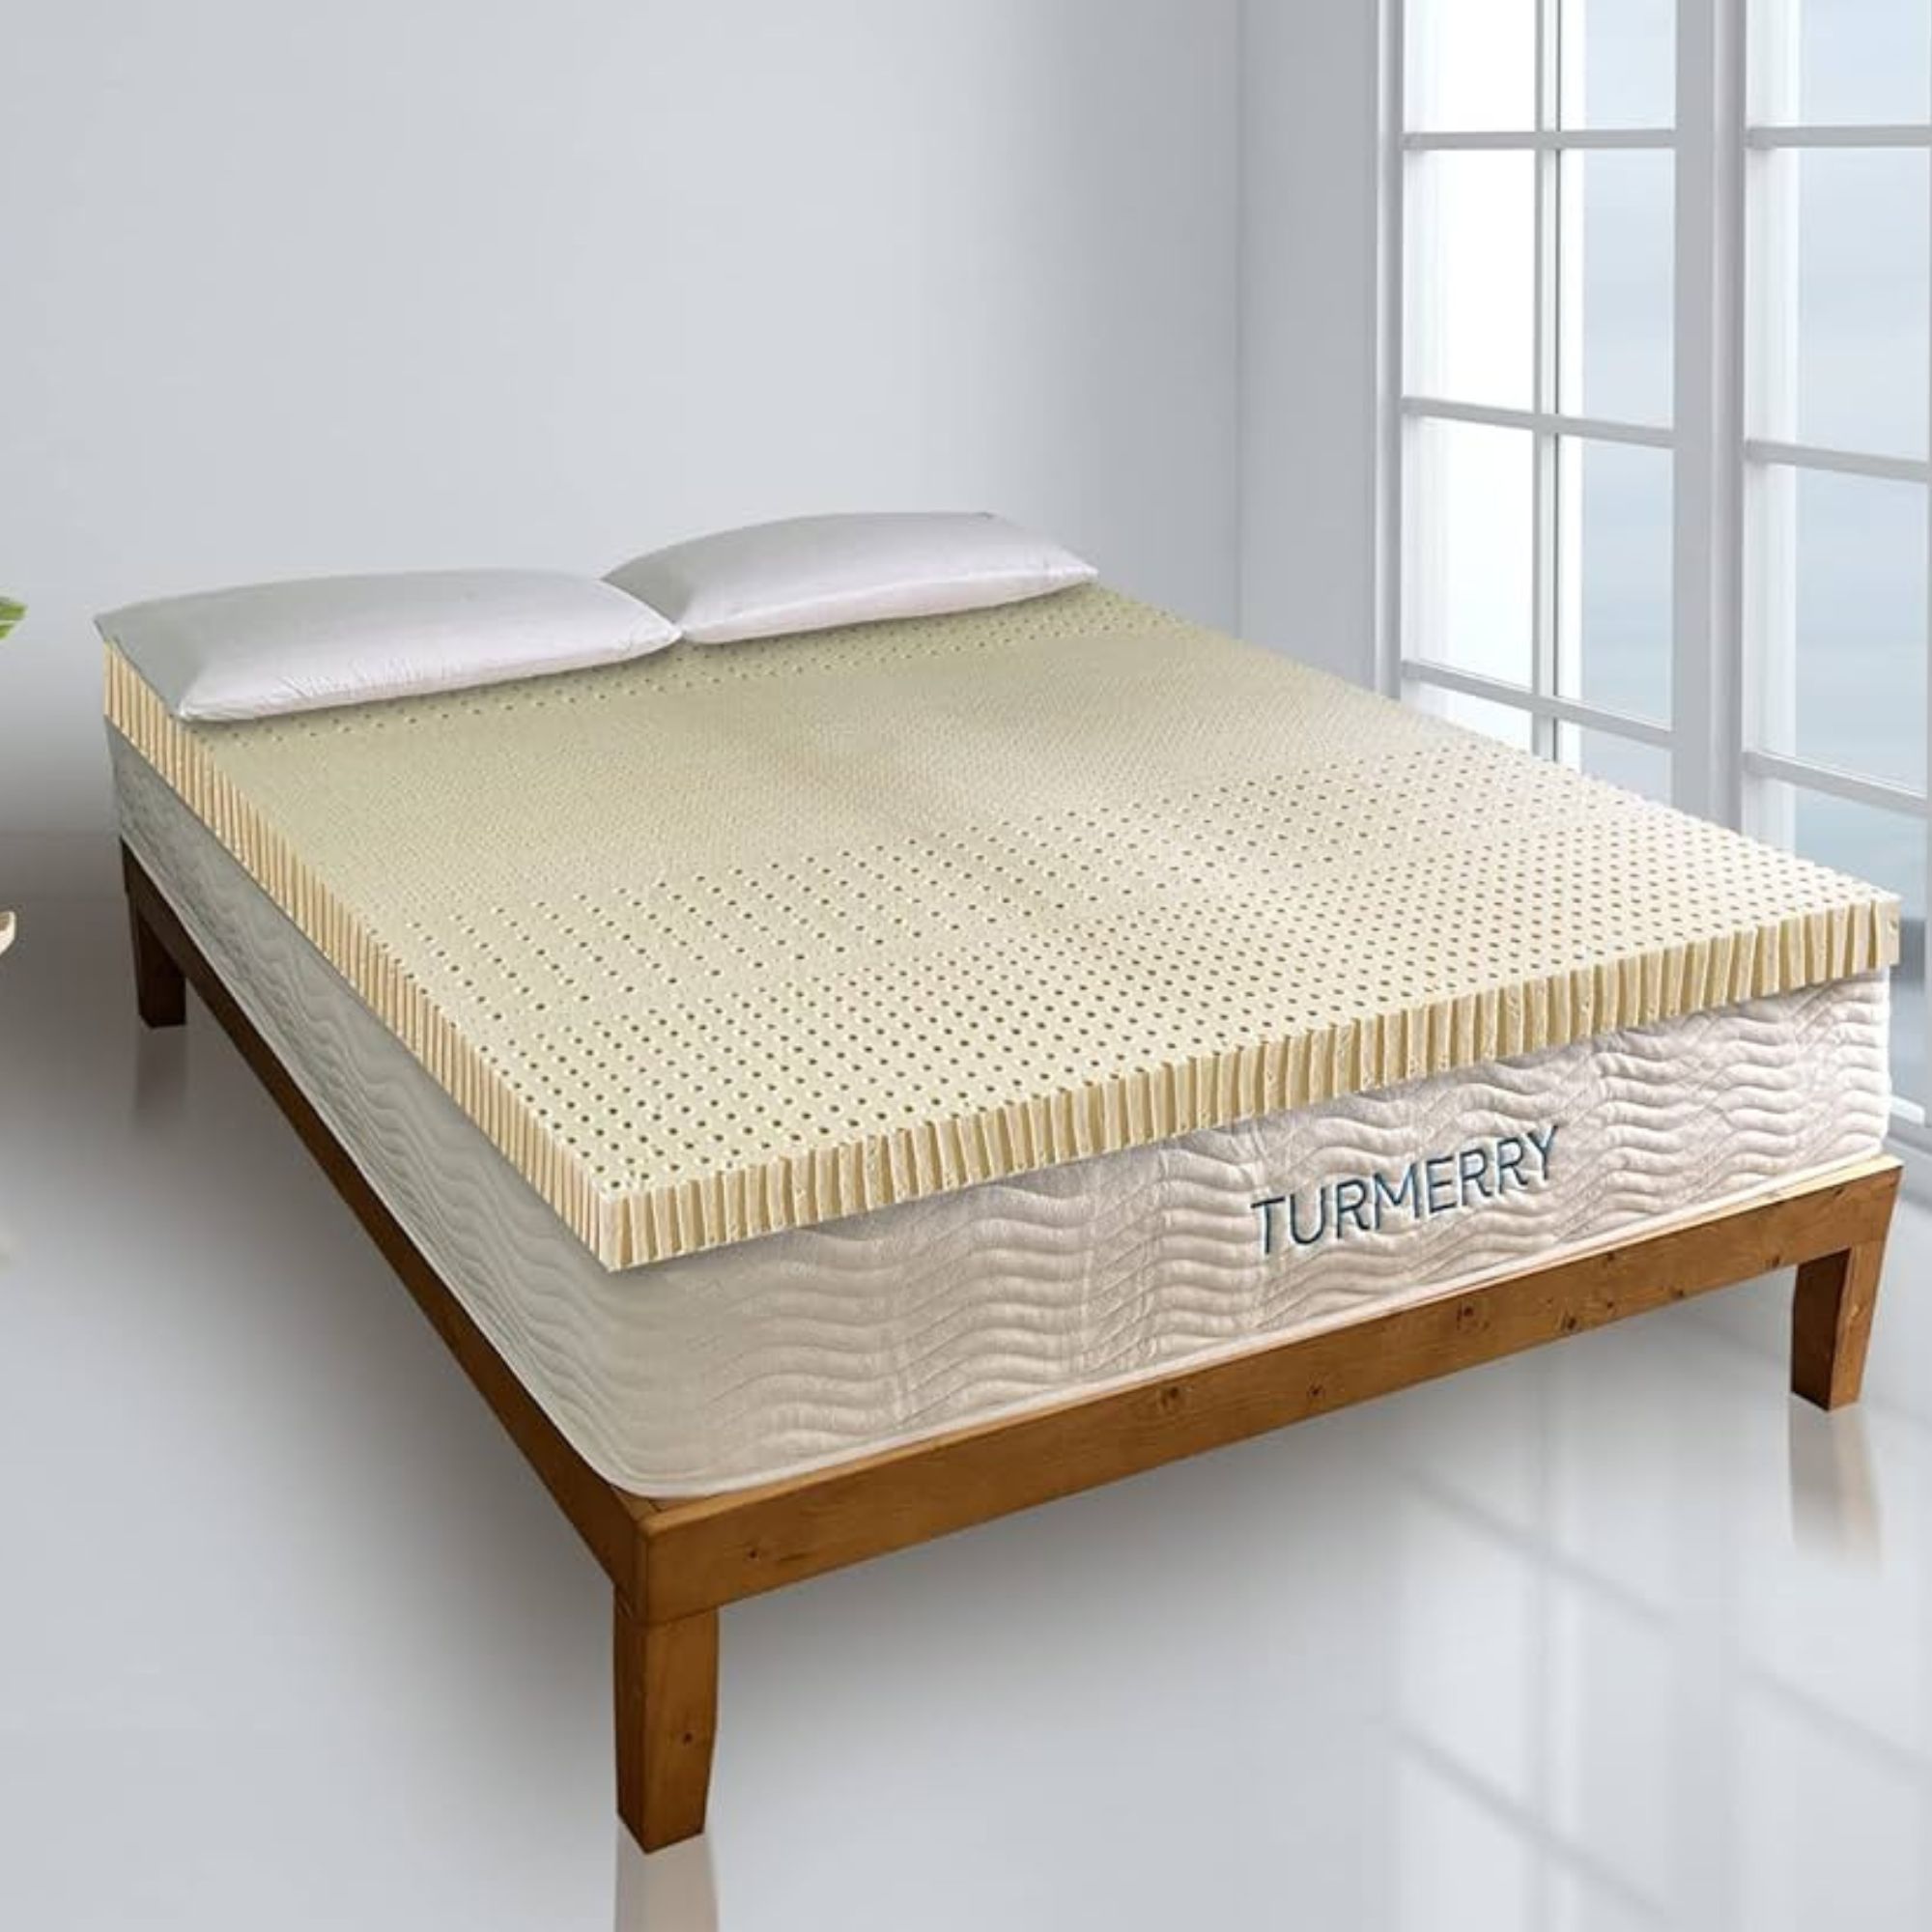 Turmerry Latex Mattress Topper on a bed against a white wall.